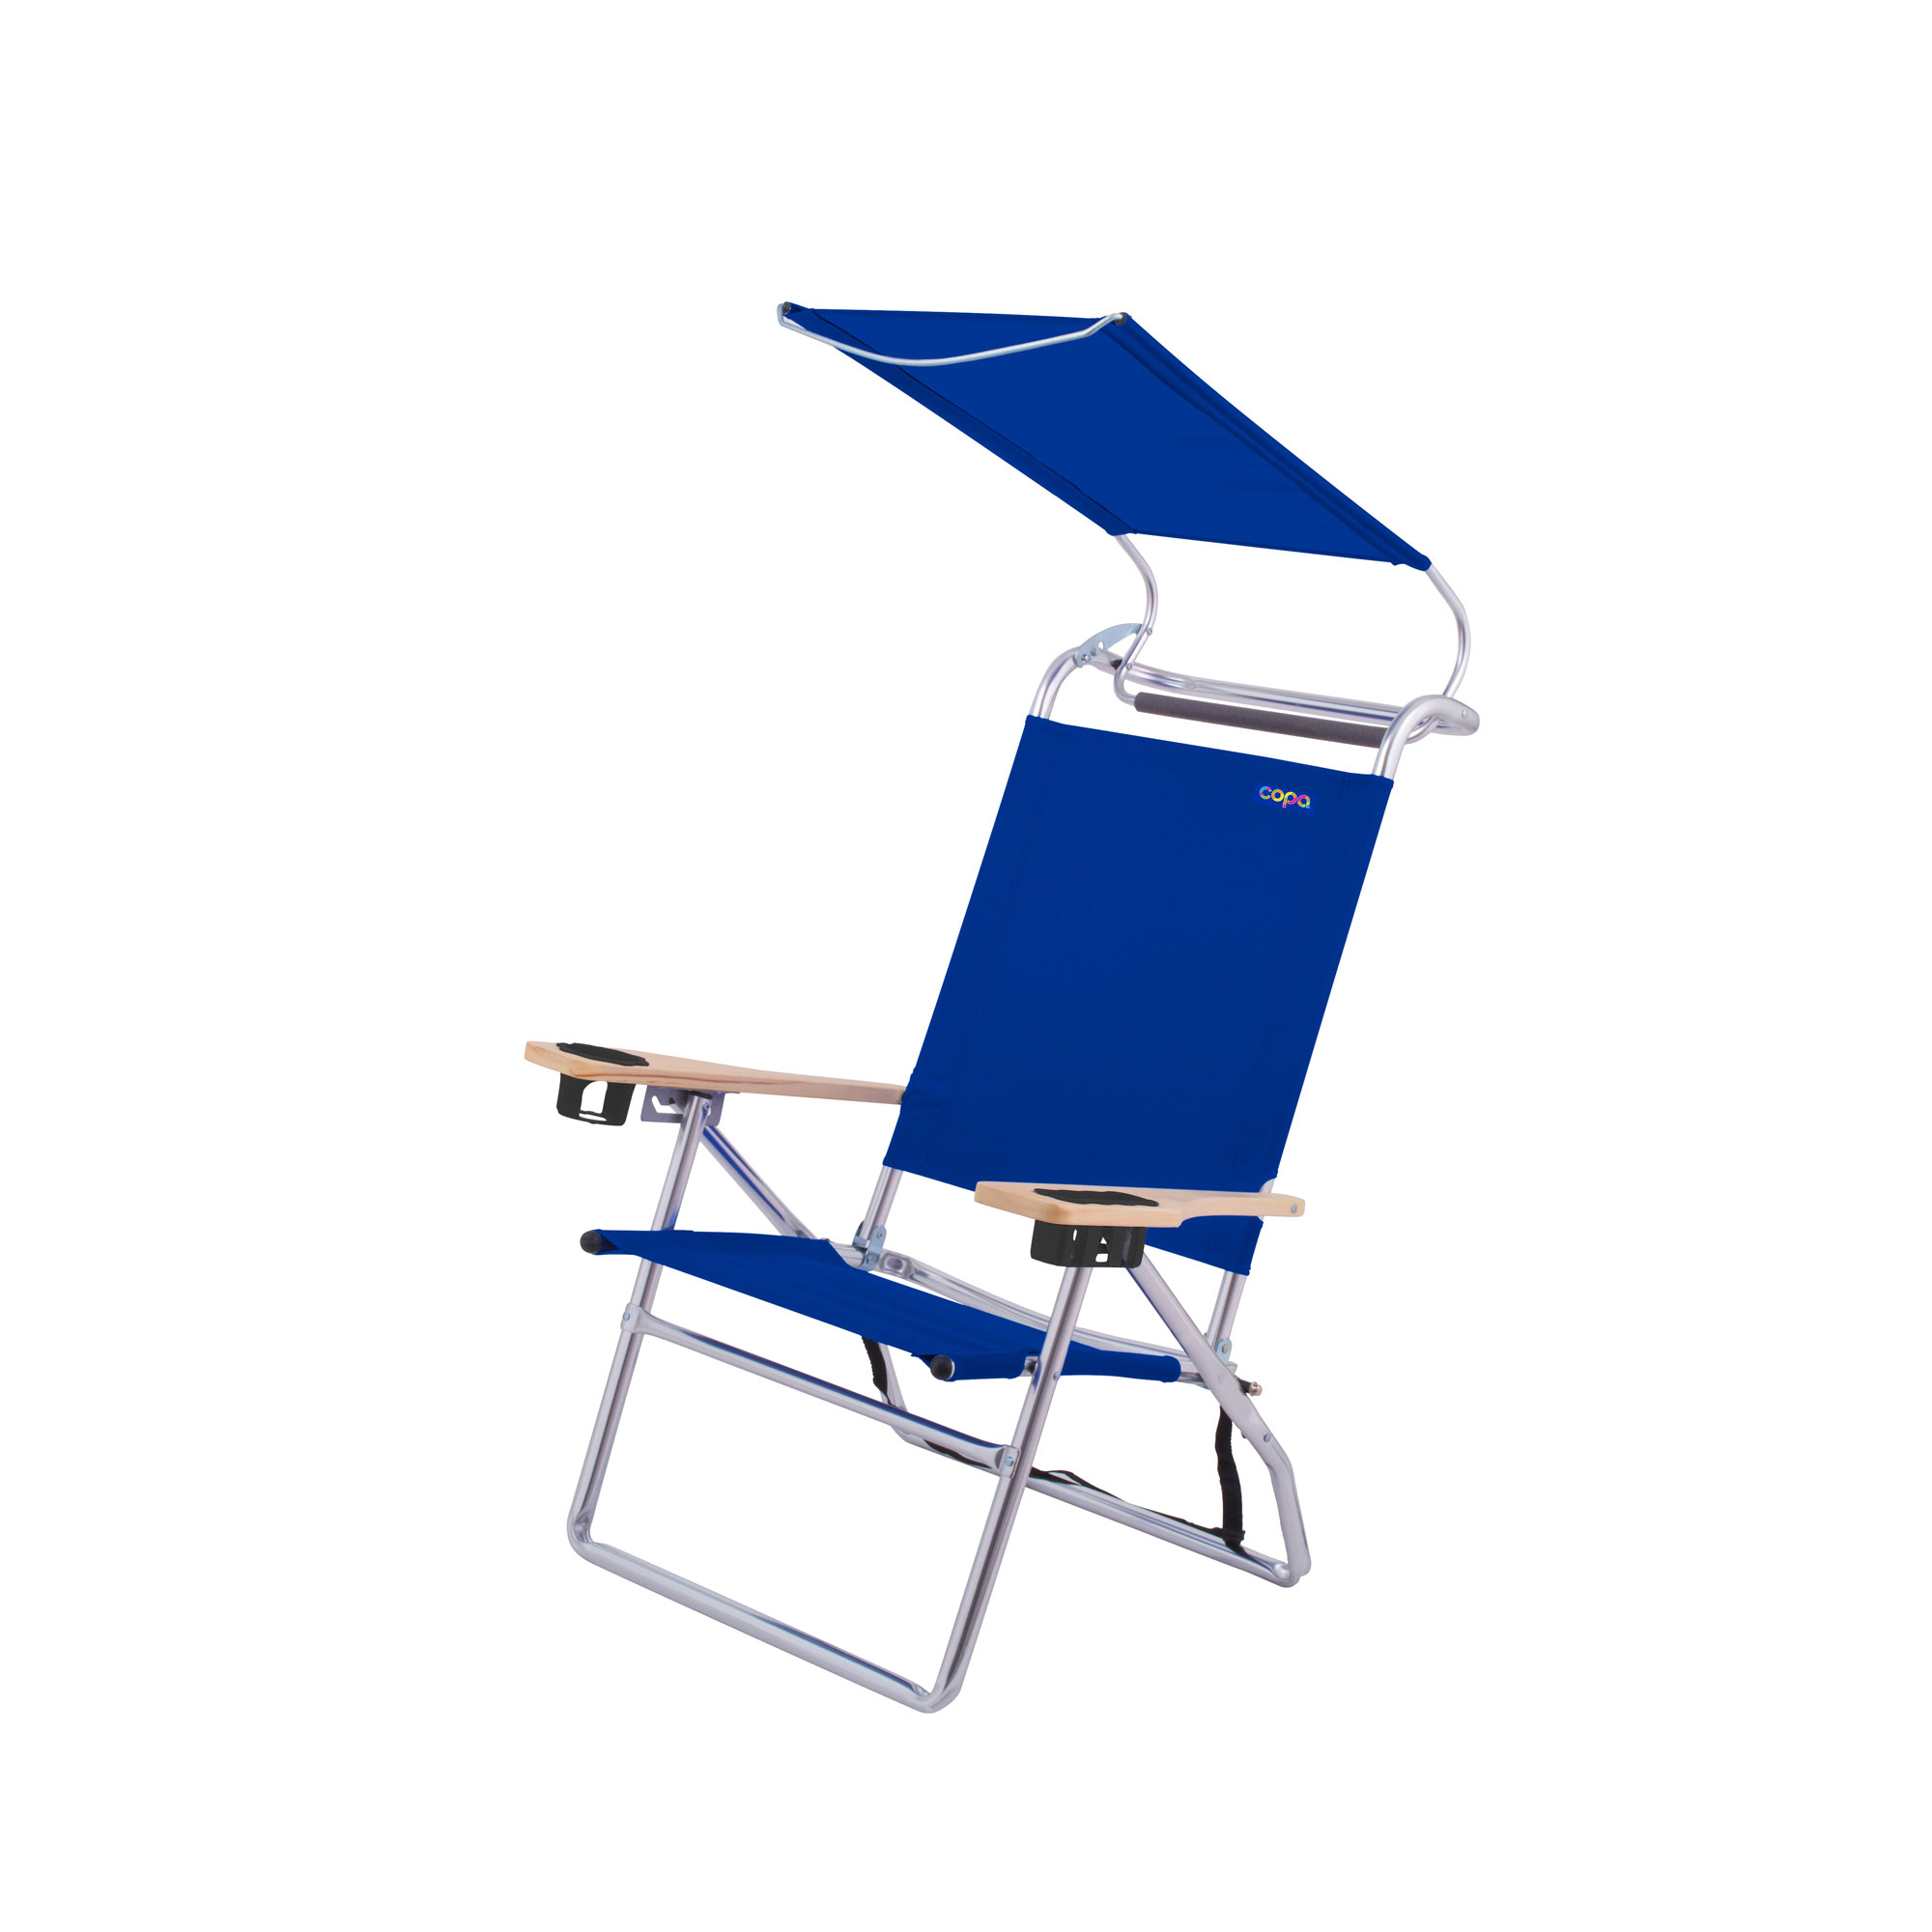 Simple Aluminum Beach Chair With Canopy for Large Space